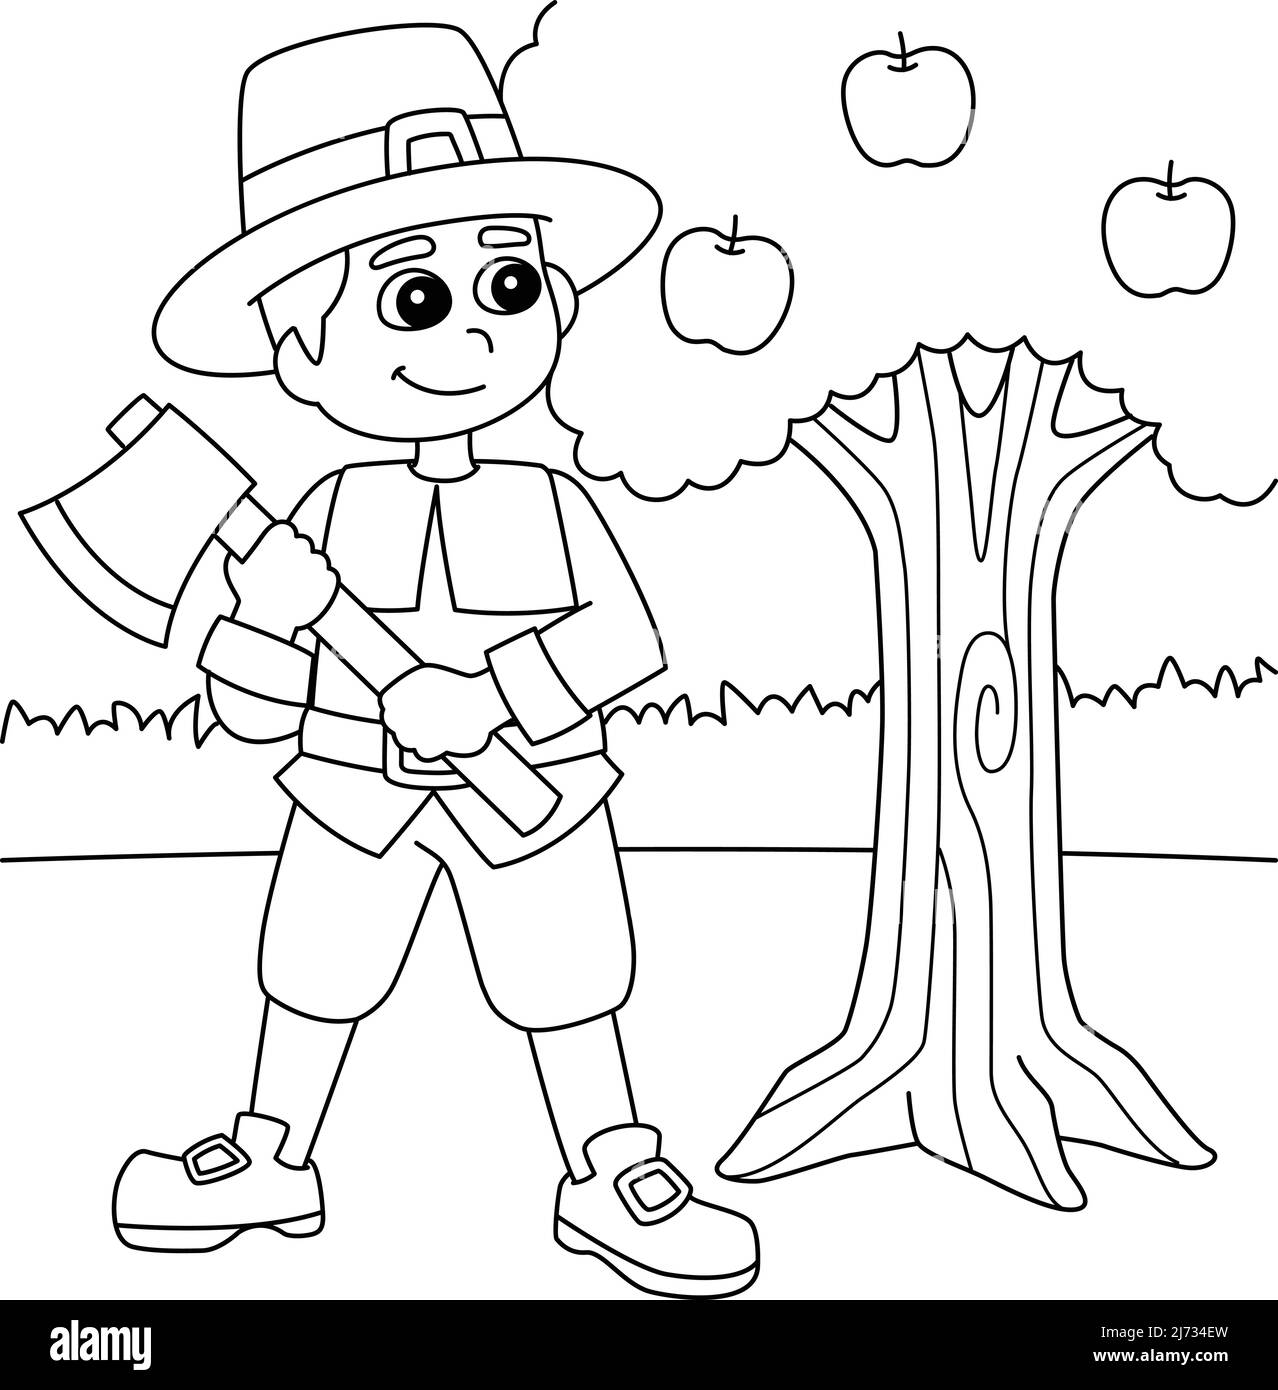 axe coloring pages